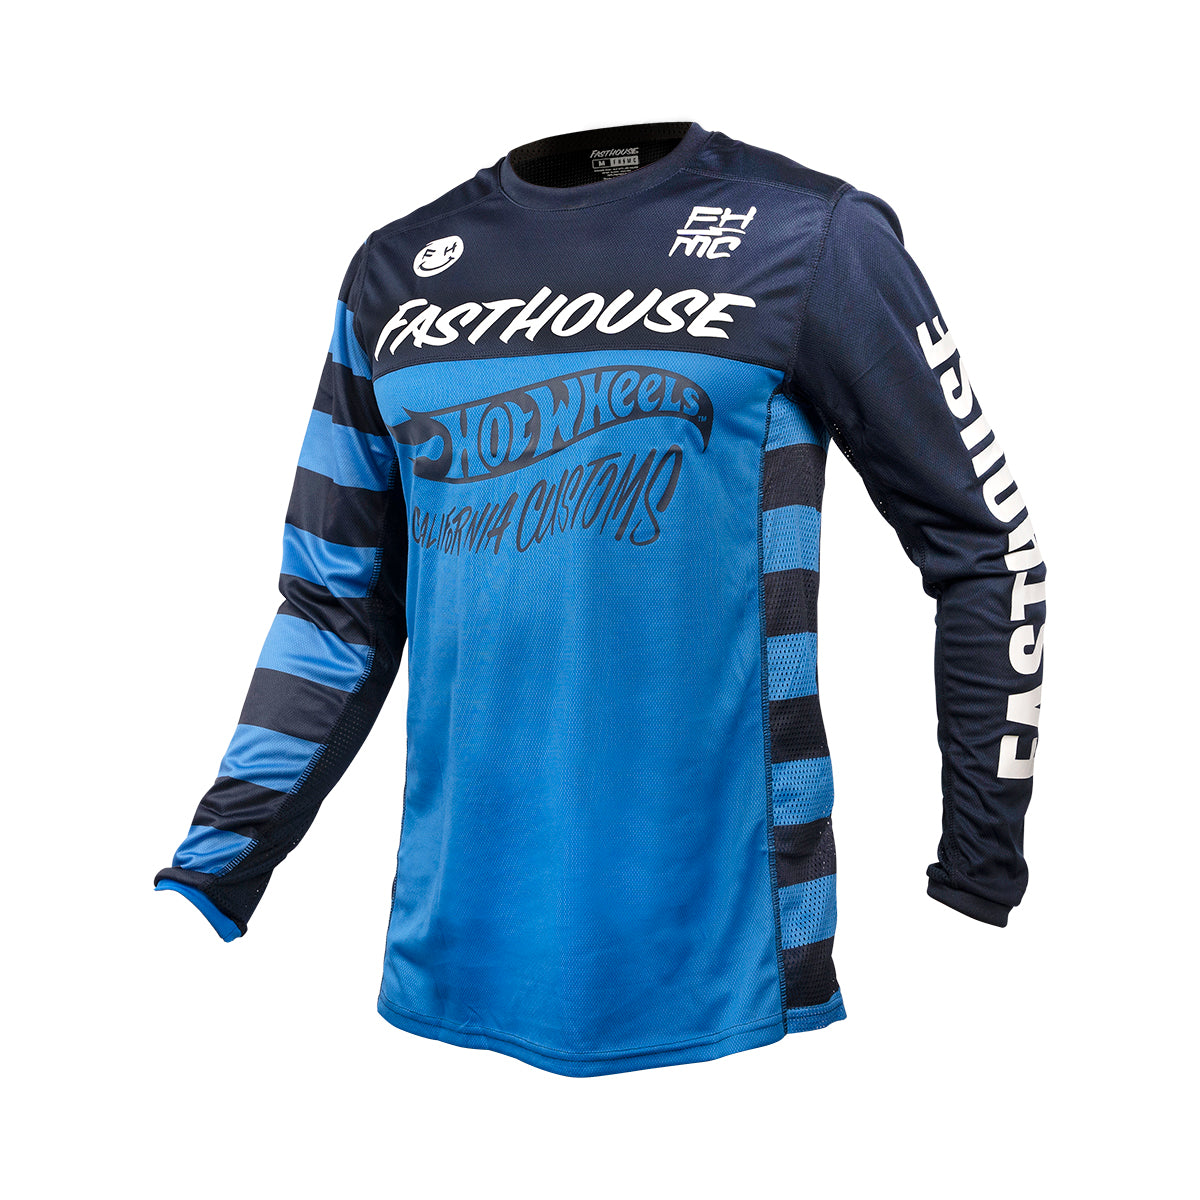 Hot Wheels Grindhouse Youth Jersey - Electric Blue